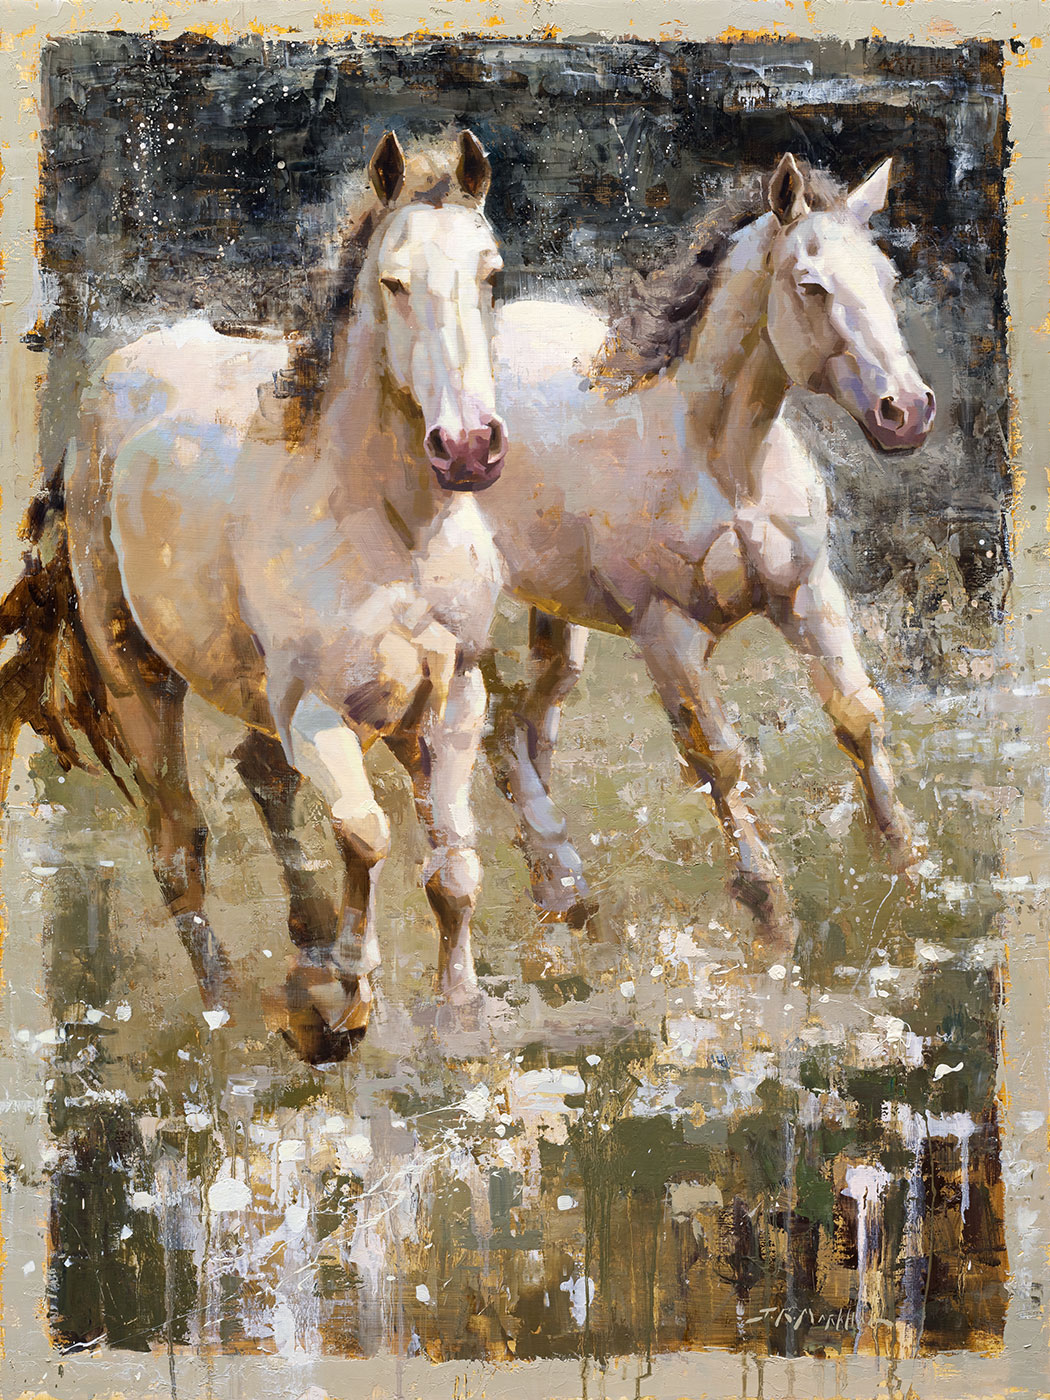 Poetry in Motion - painting of white horses by artist Jerry Markham